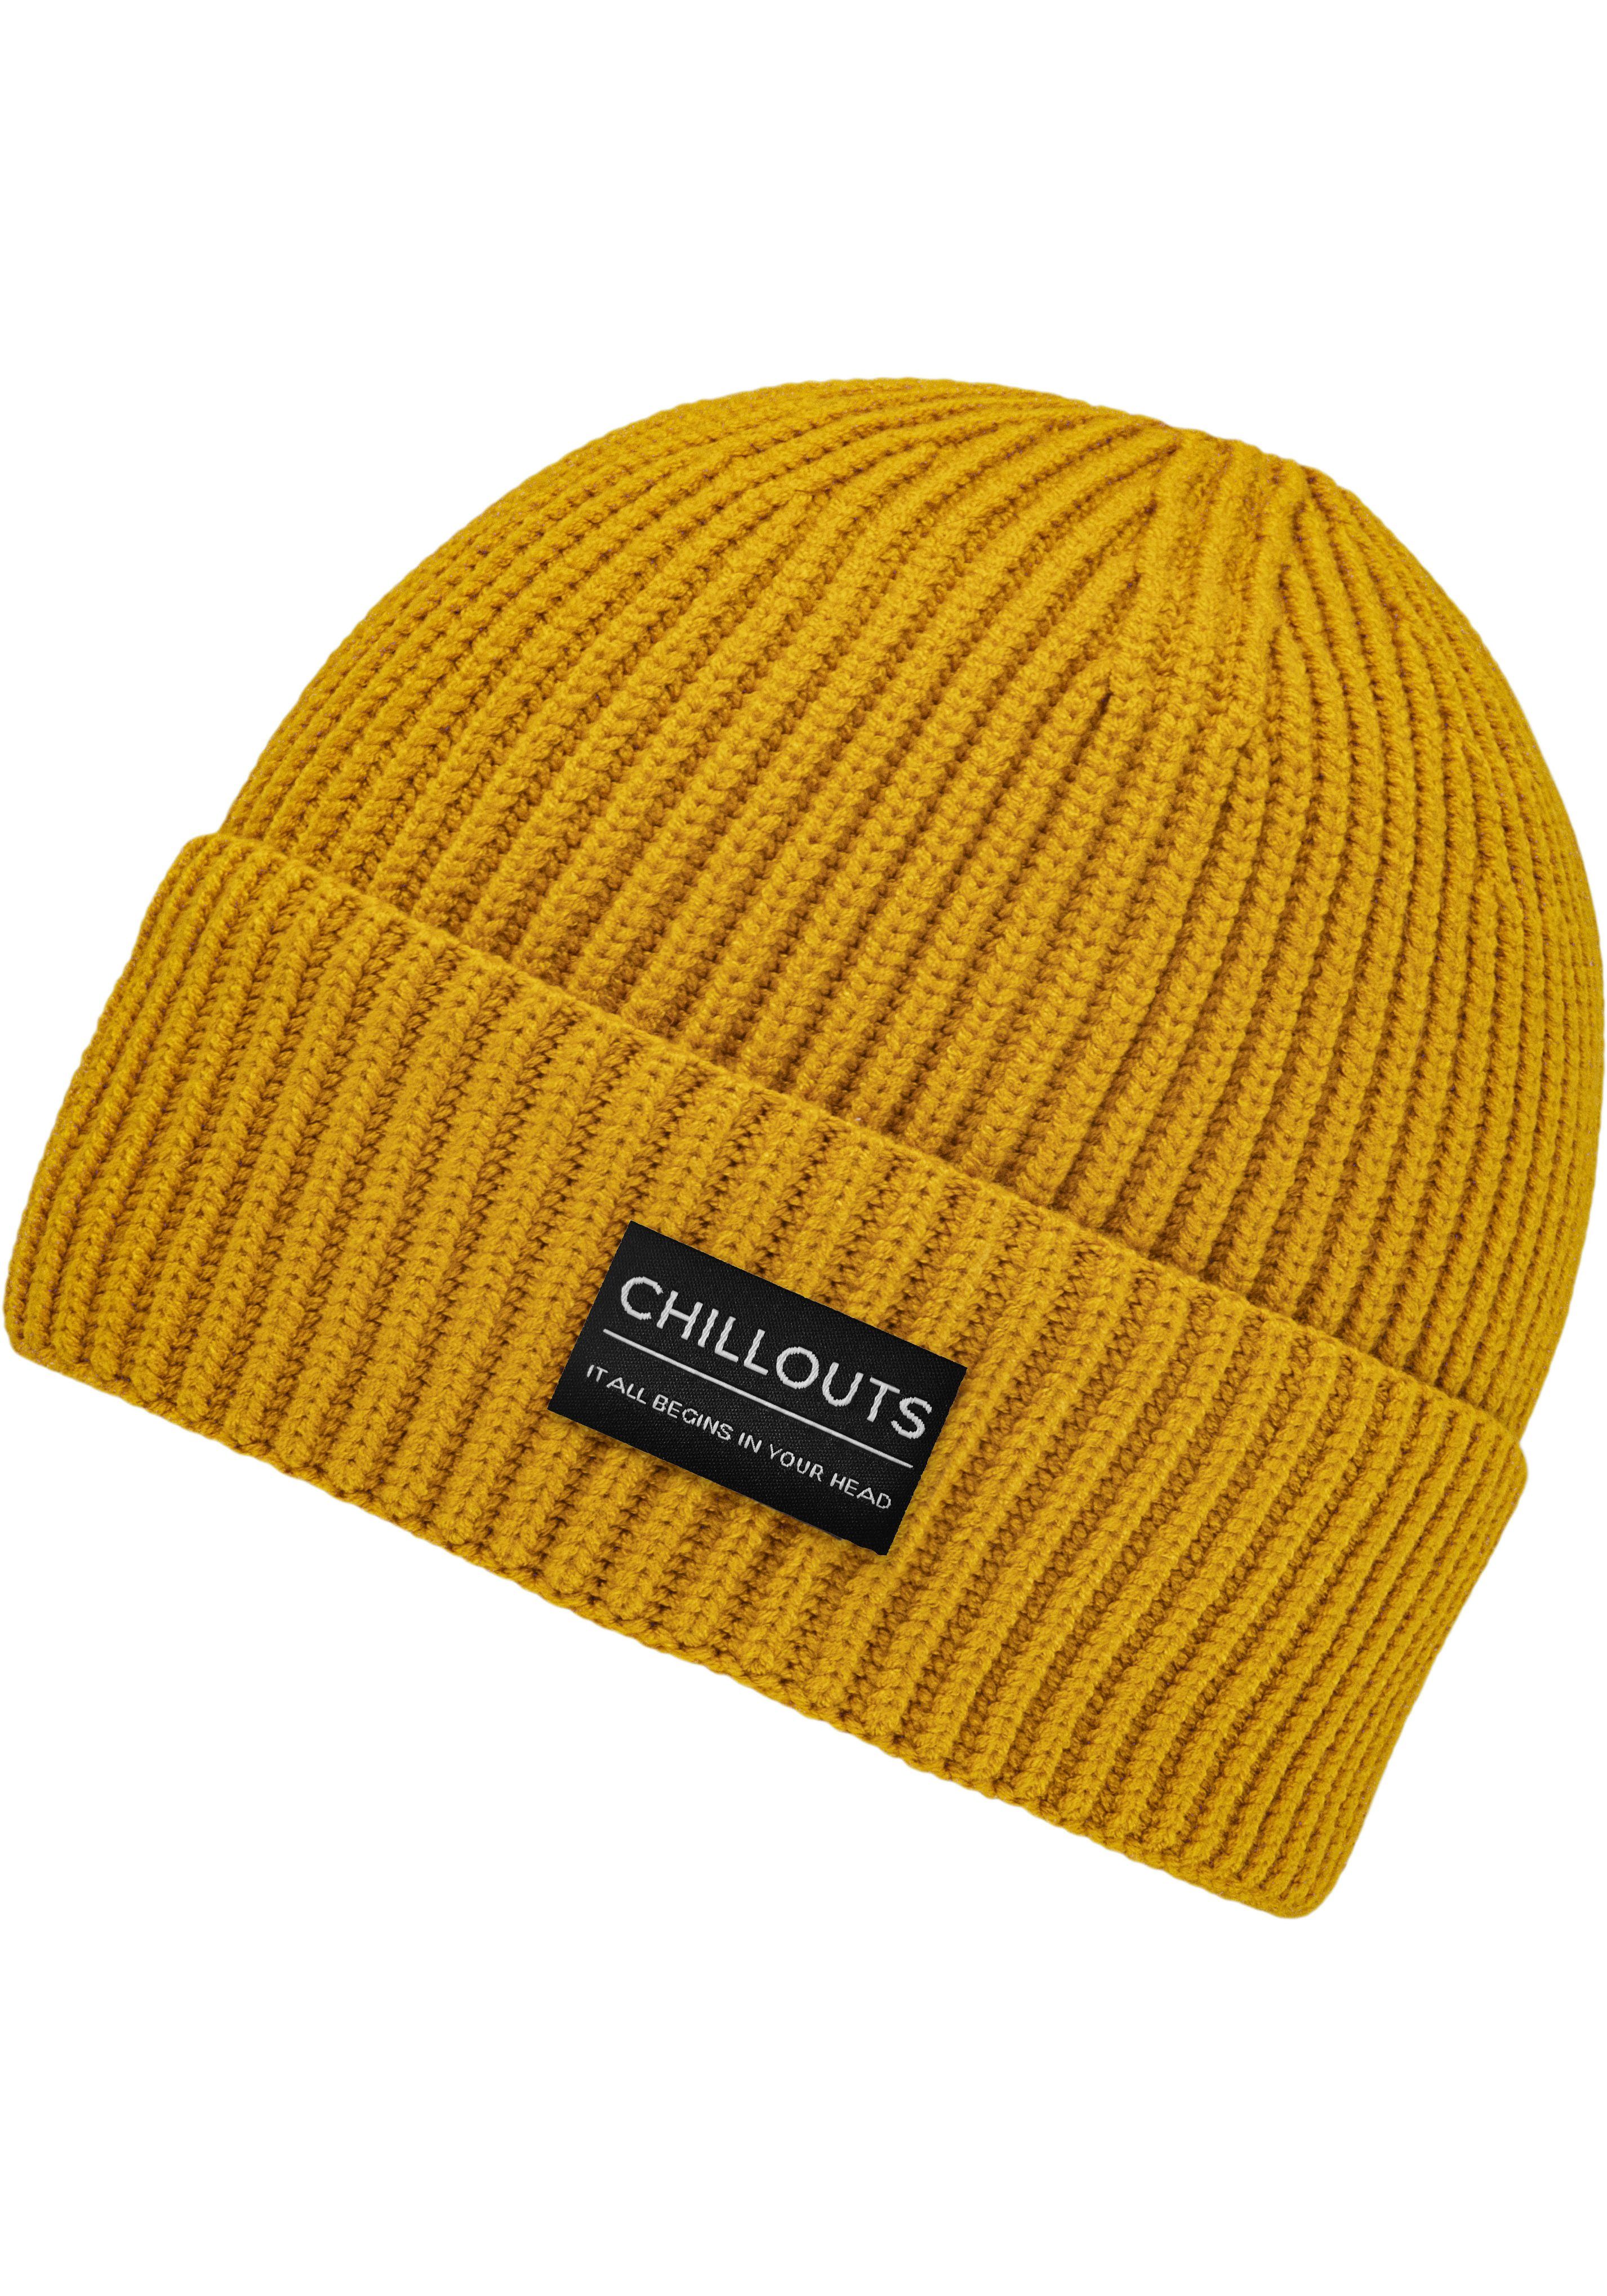 chillouts Strickmütze Caleb Hat In Rippenstrick-Optik curry